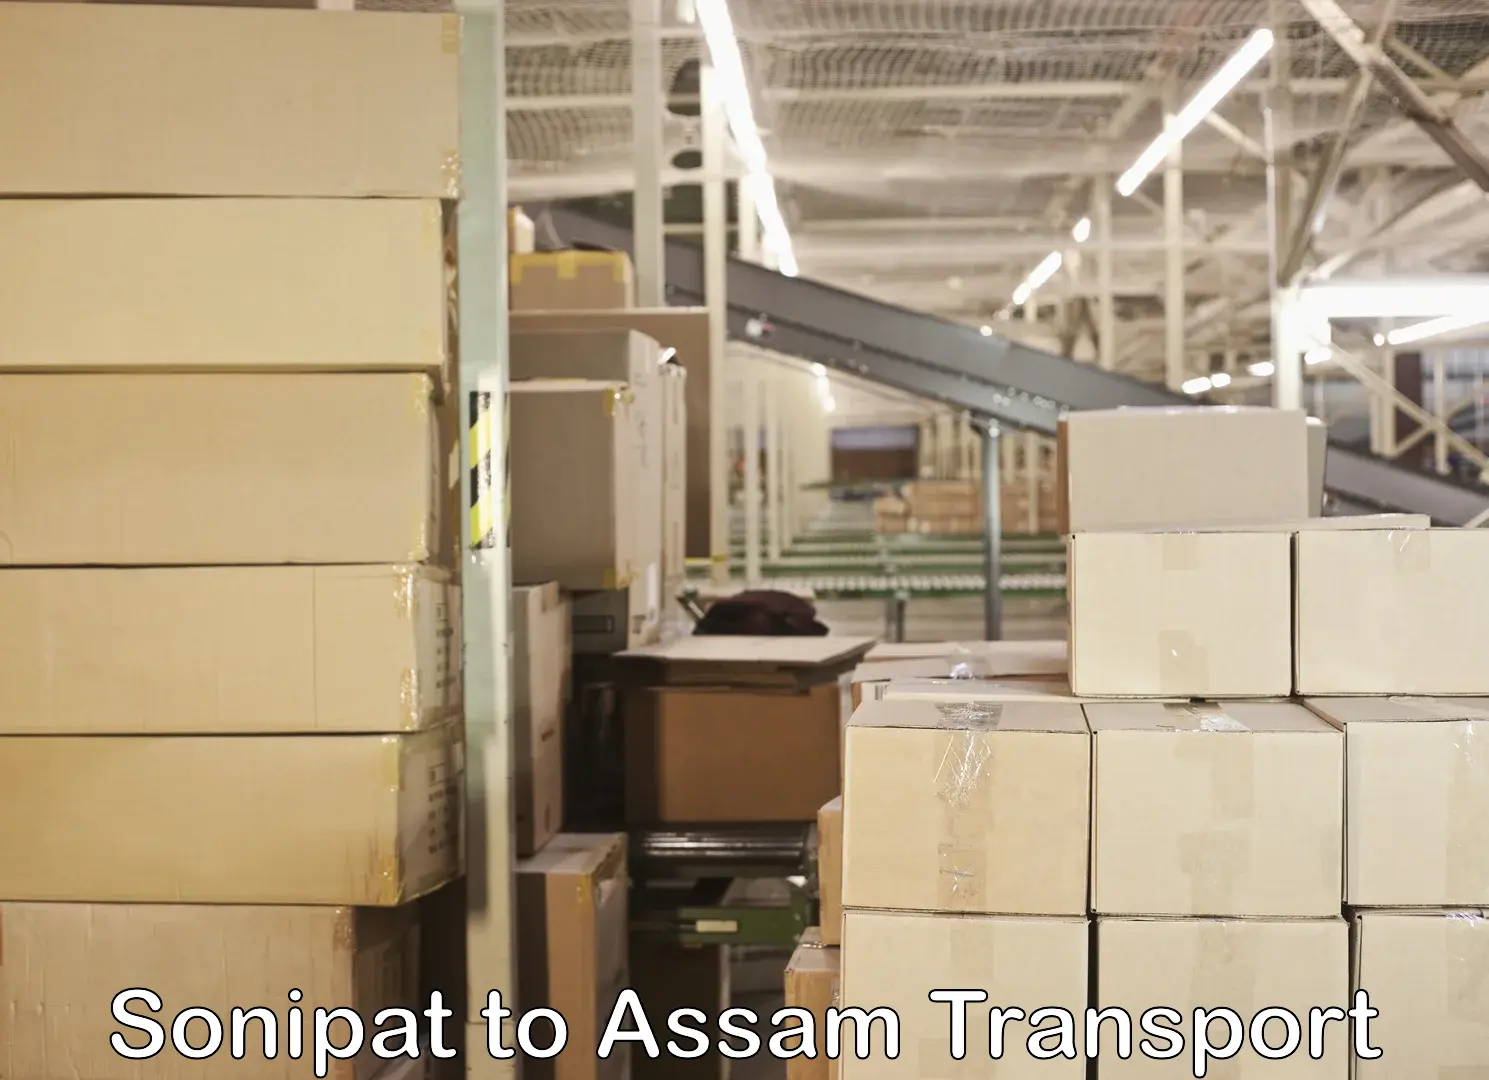 Daily parcel service transport Sonipat to Guwahati